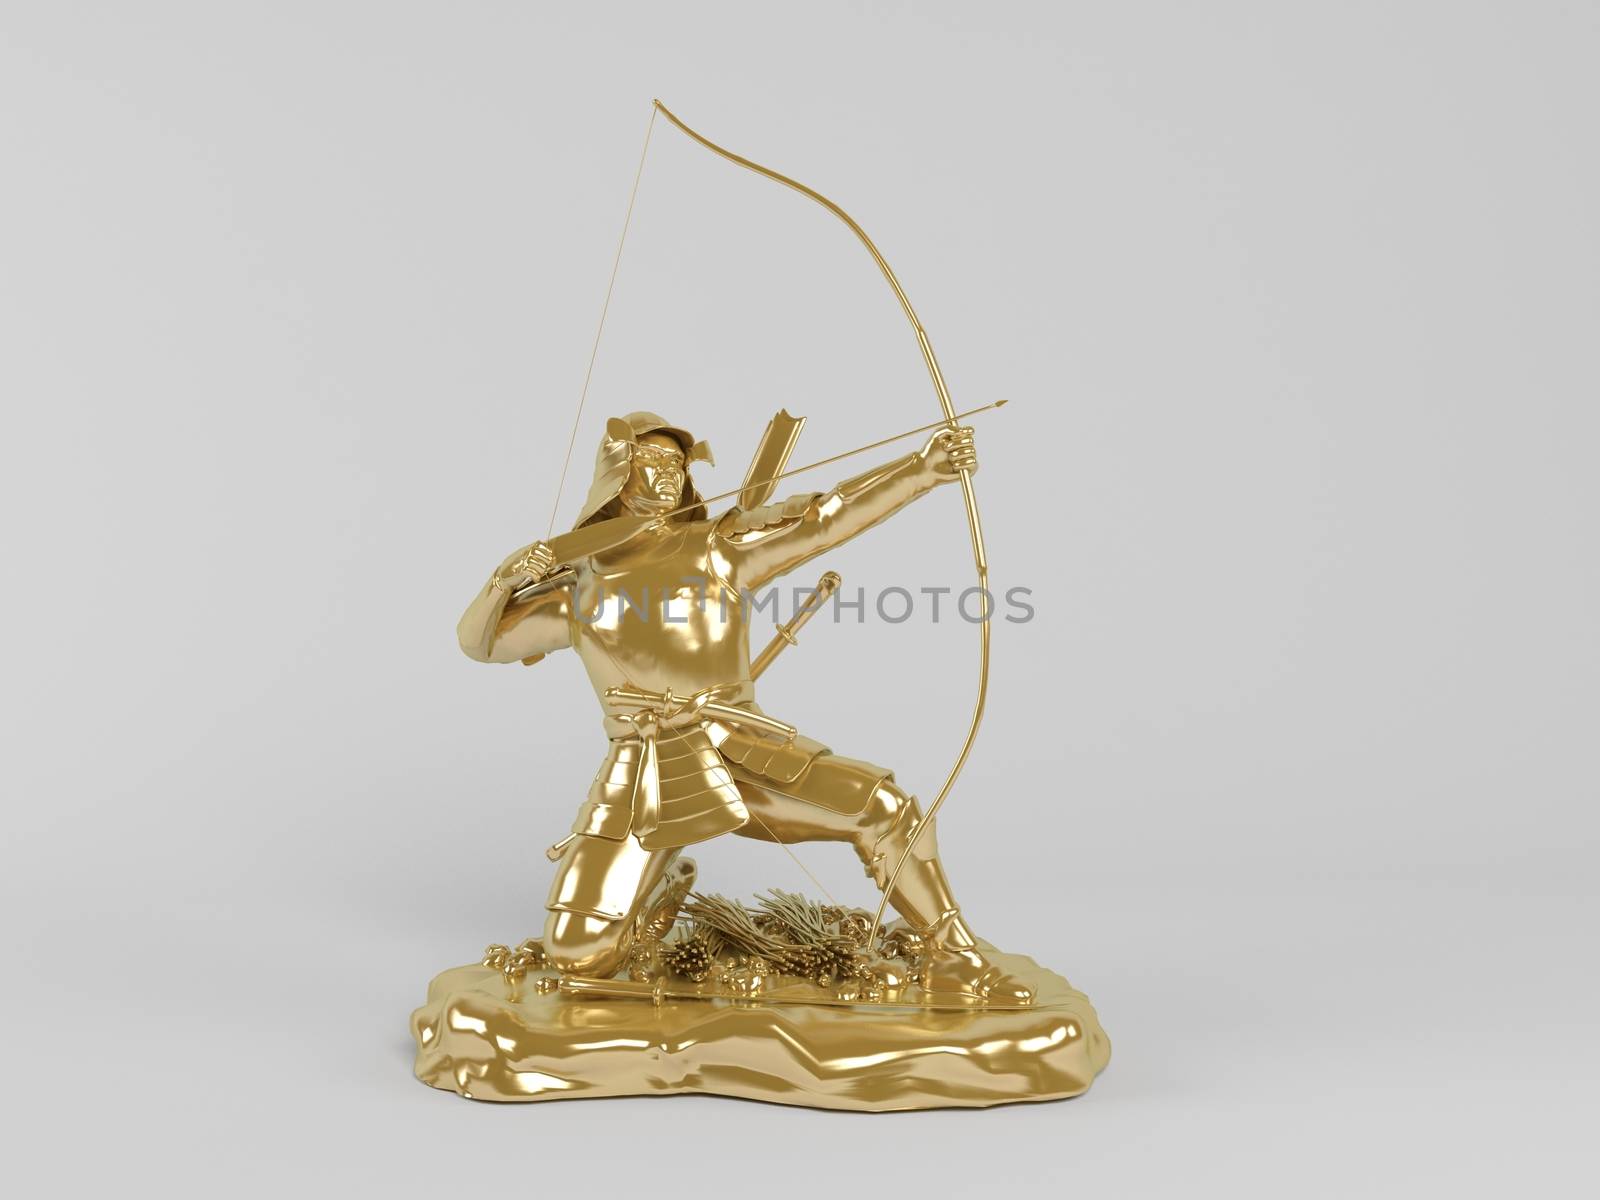 3d rendering of a golden statue painted with gold in on a white scene background